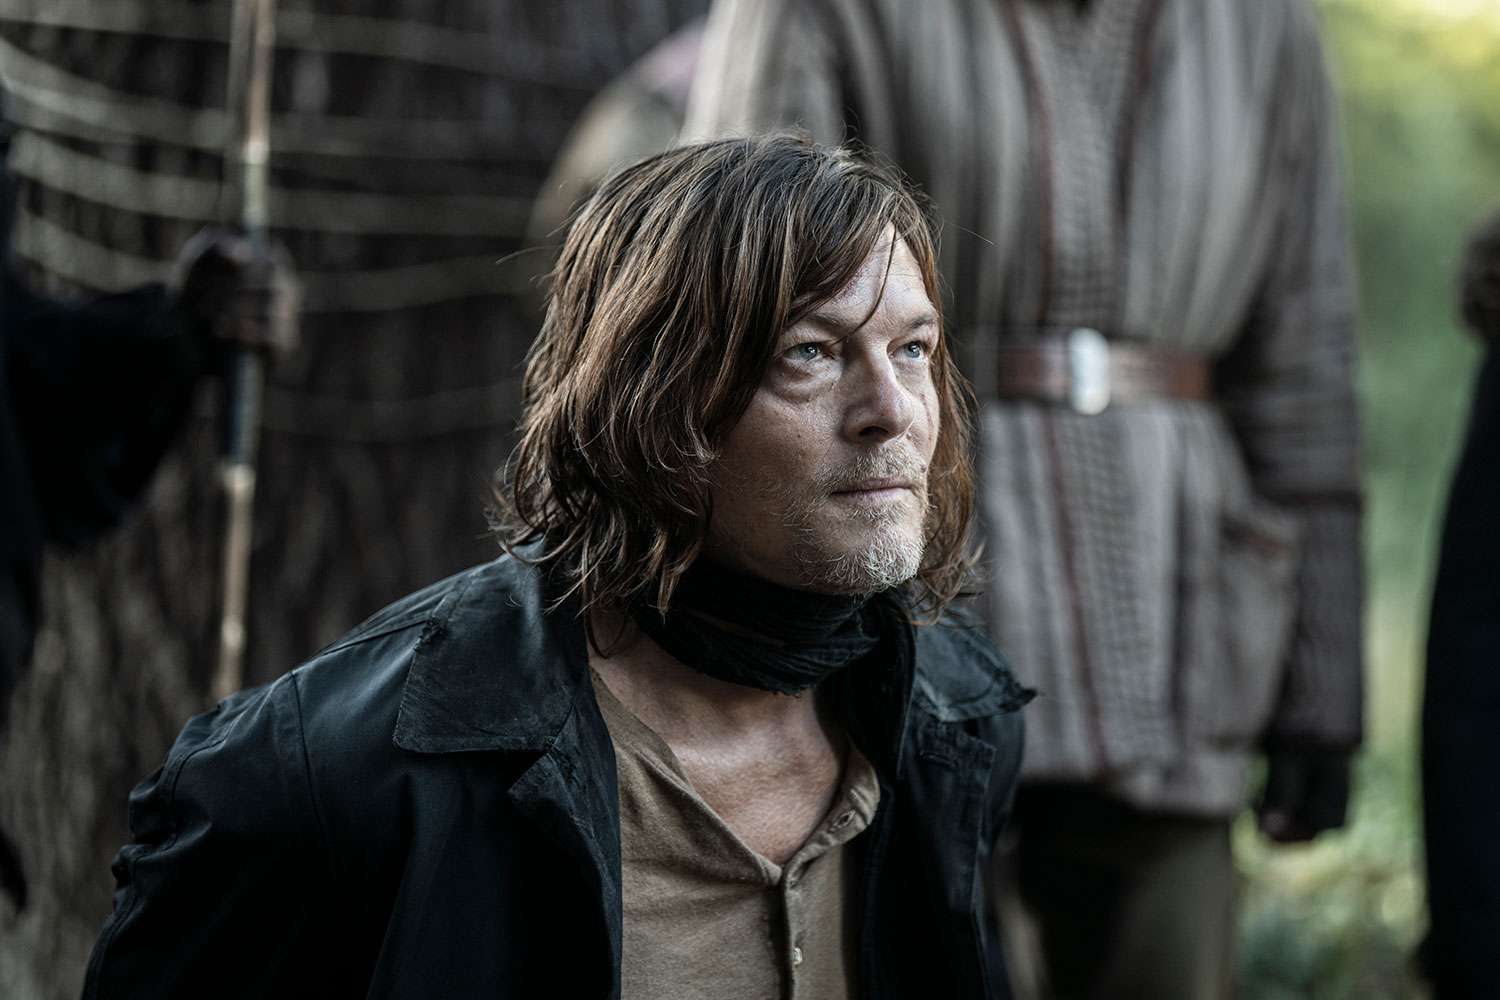 The Walking Dead: Daryl Dixon Cast - Every Actor and Character in the AMC Series